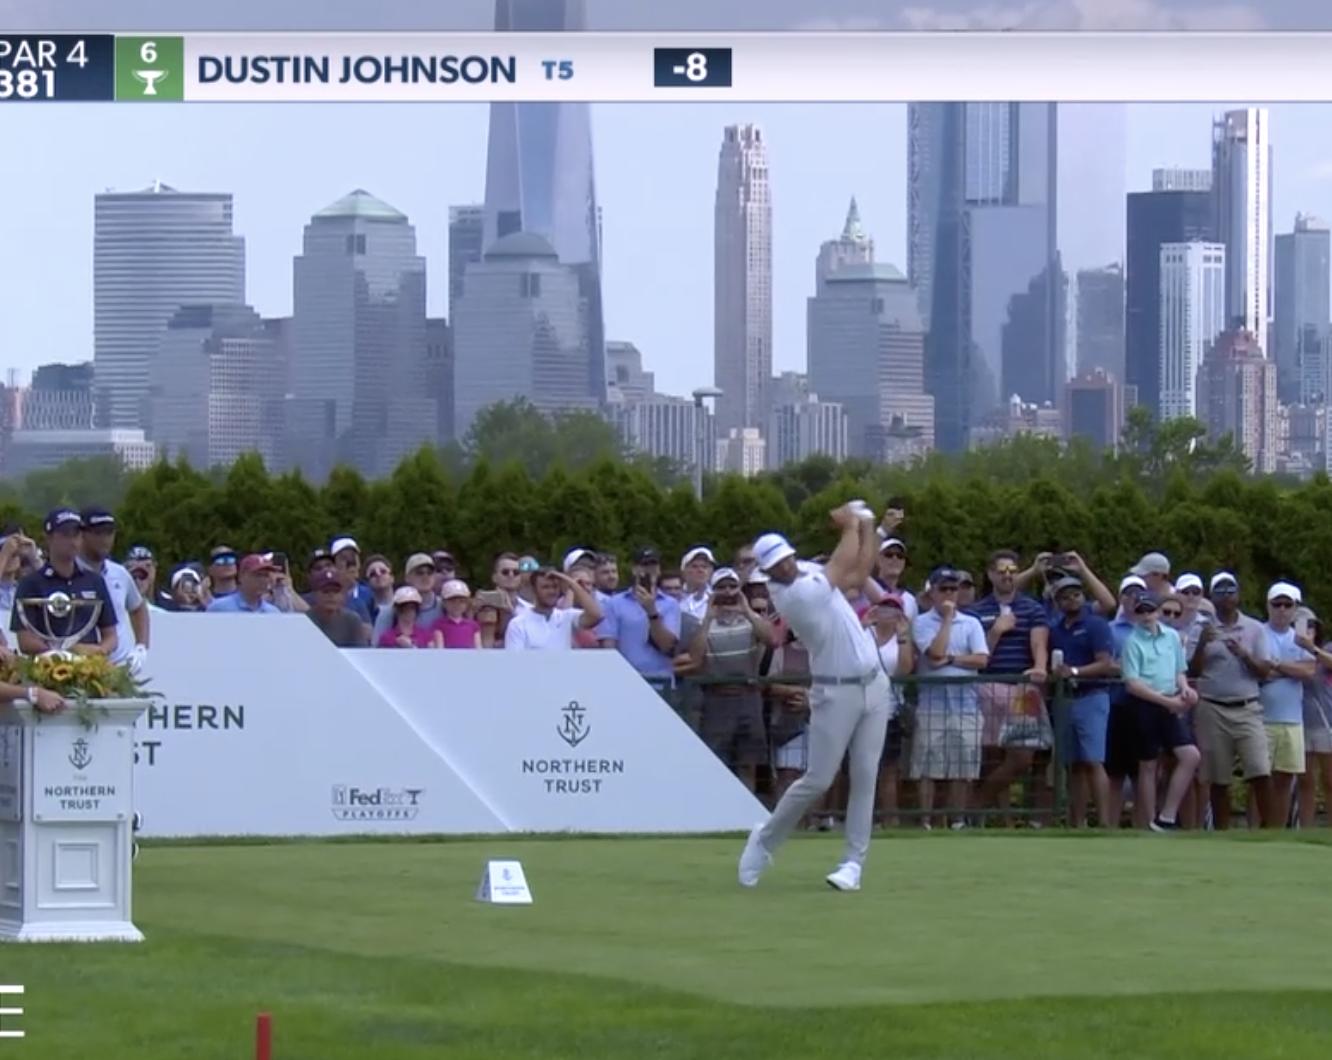 Jeff Macke on Twitter: "Dustin Johnson's pants are the of men's slacks. Adidas this week. A possible shortage of fabric. Question for NYers: What's the deal with this course?